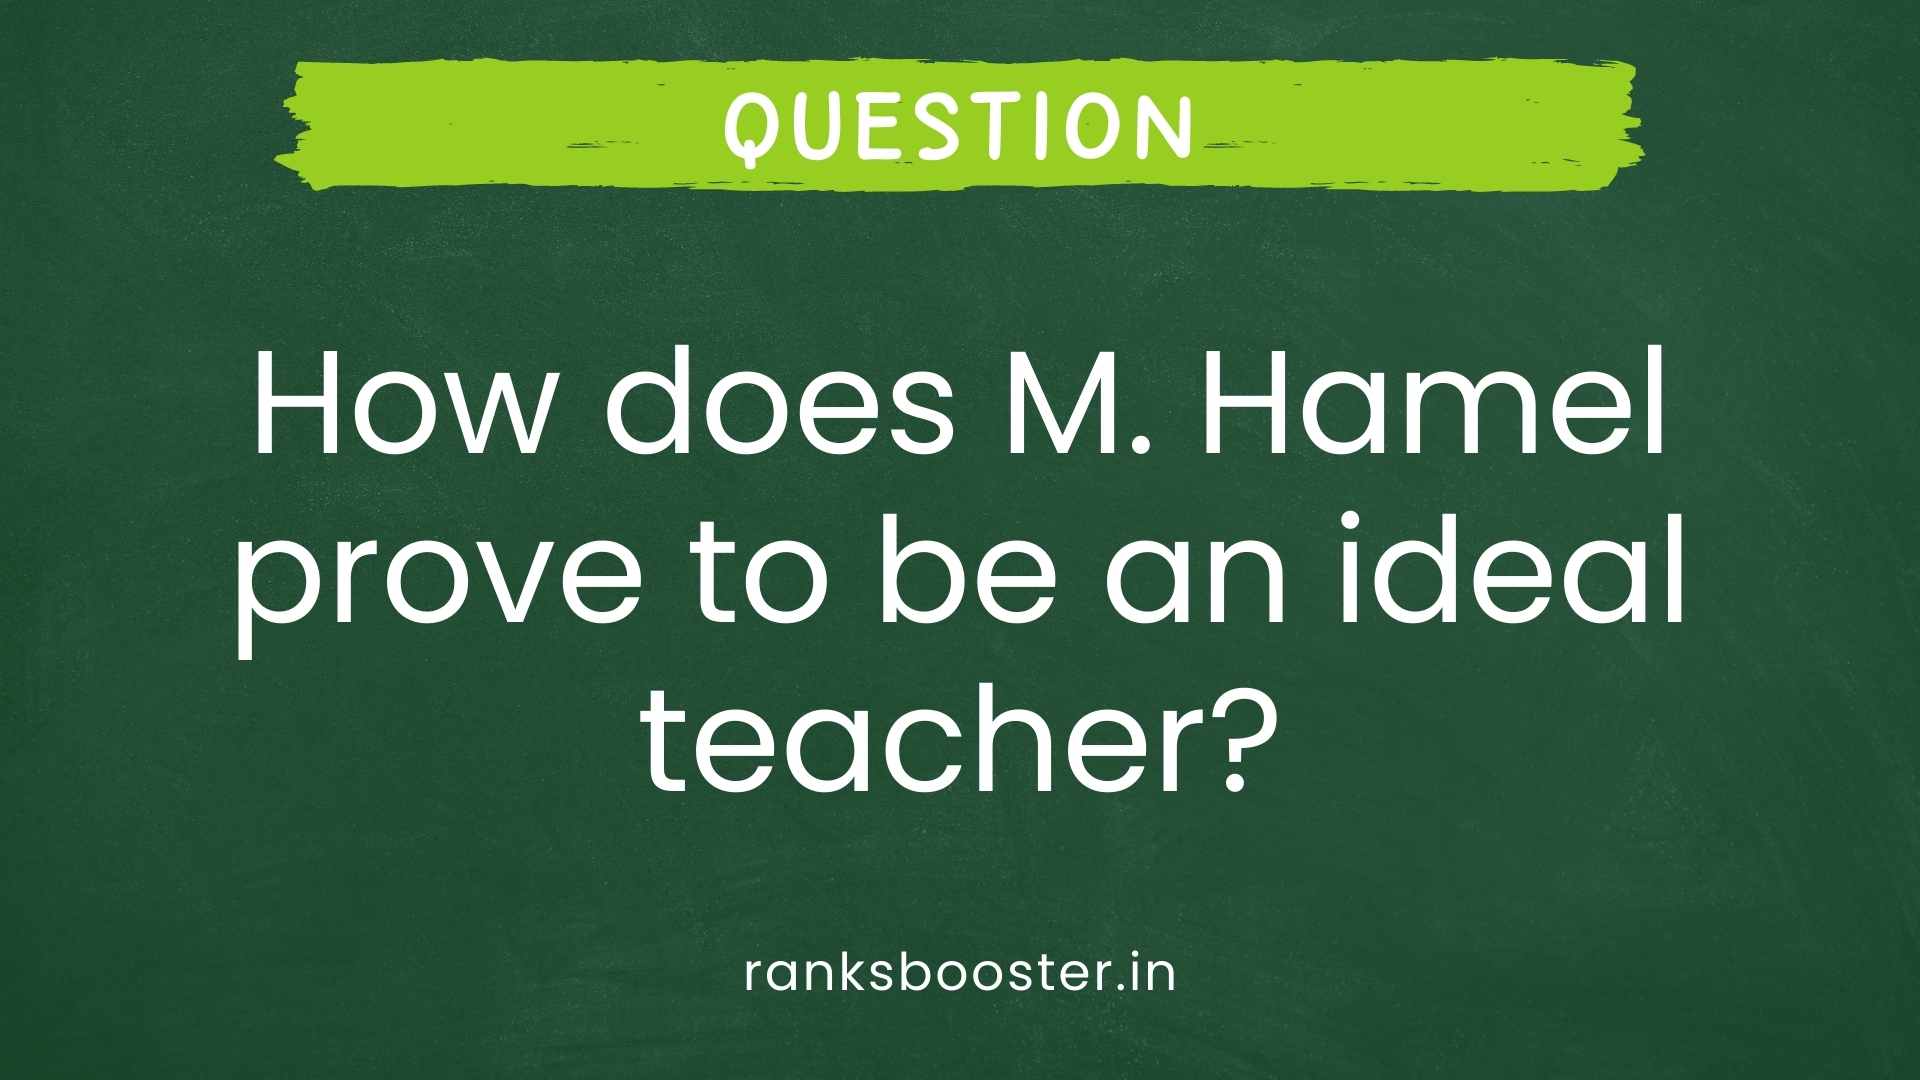 Question: How does M. Hamel prove to be an ideal teacher? [CBSE Sample Paper 2015]